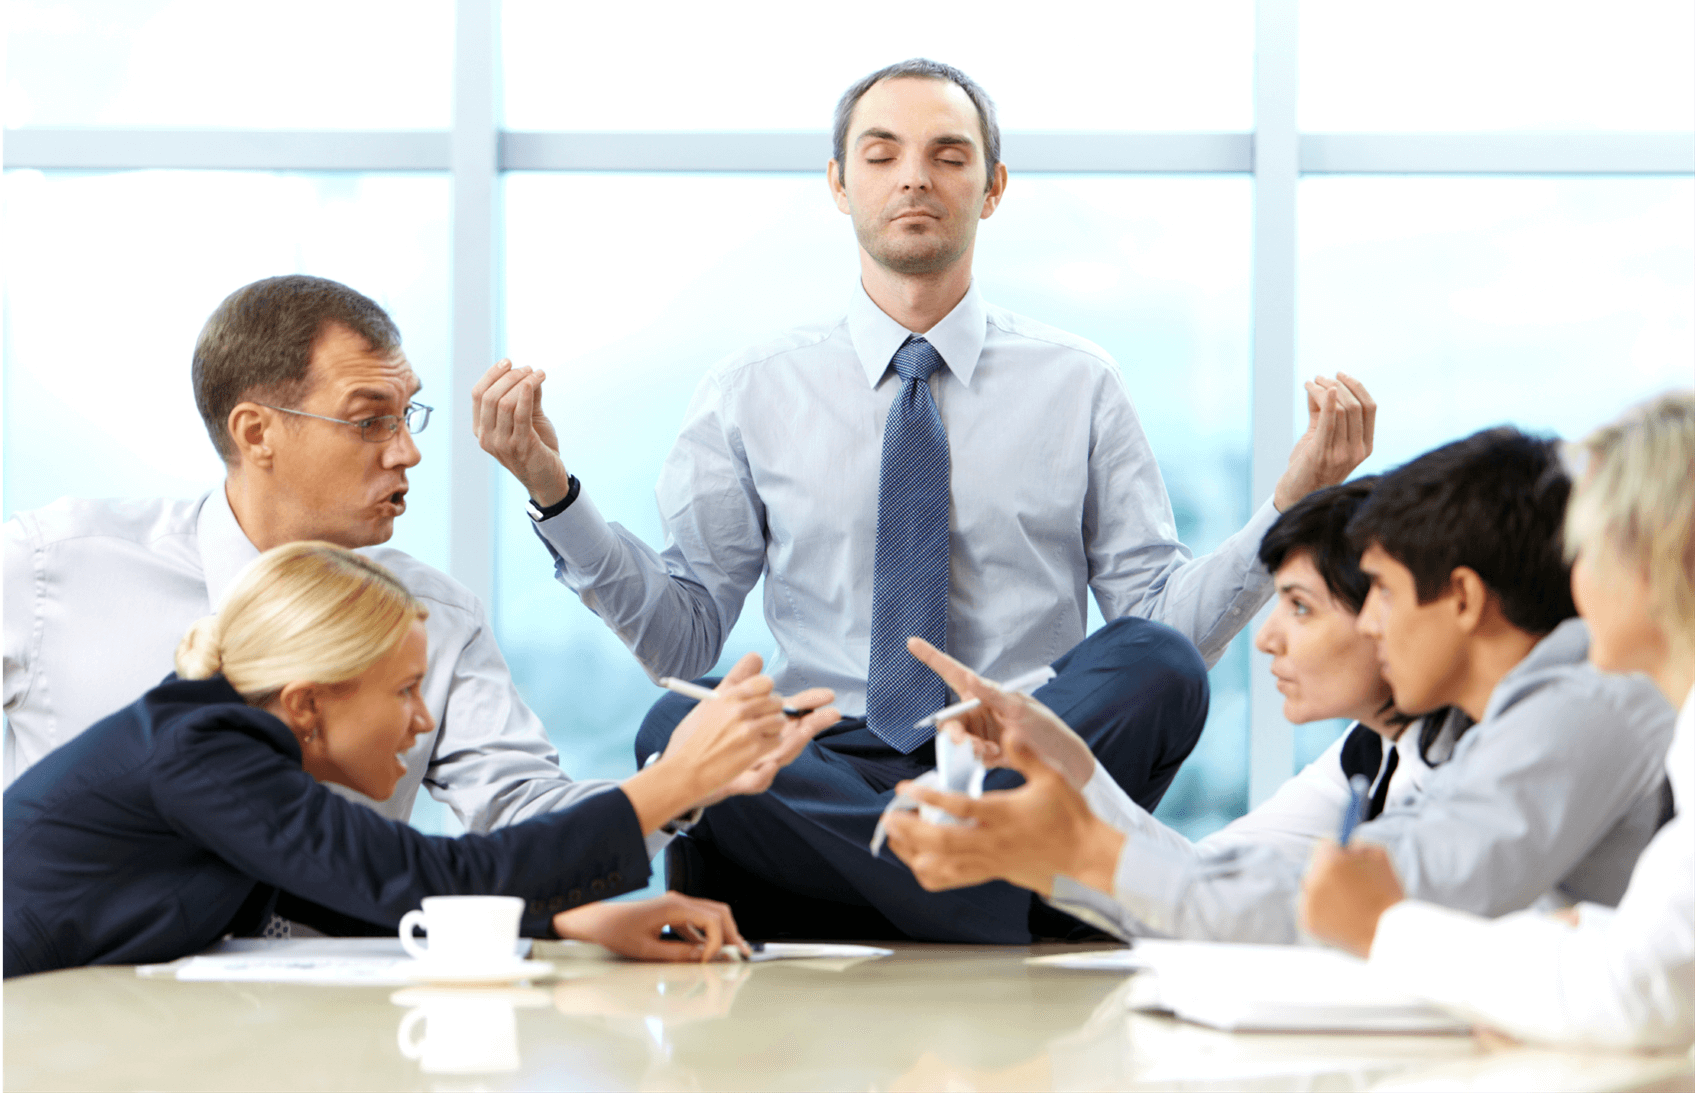 Training How To Manage Troublemaker and Handling Difficult People